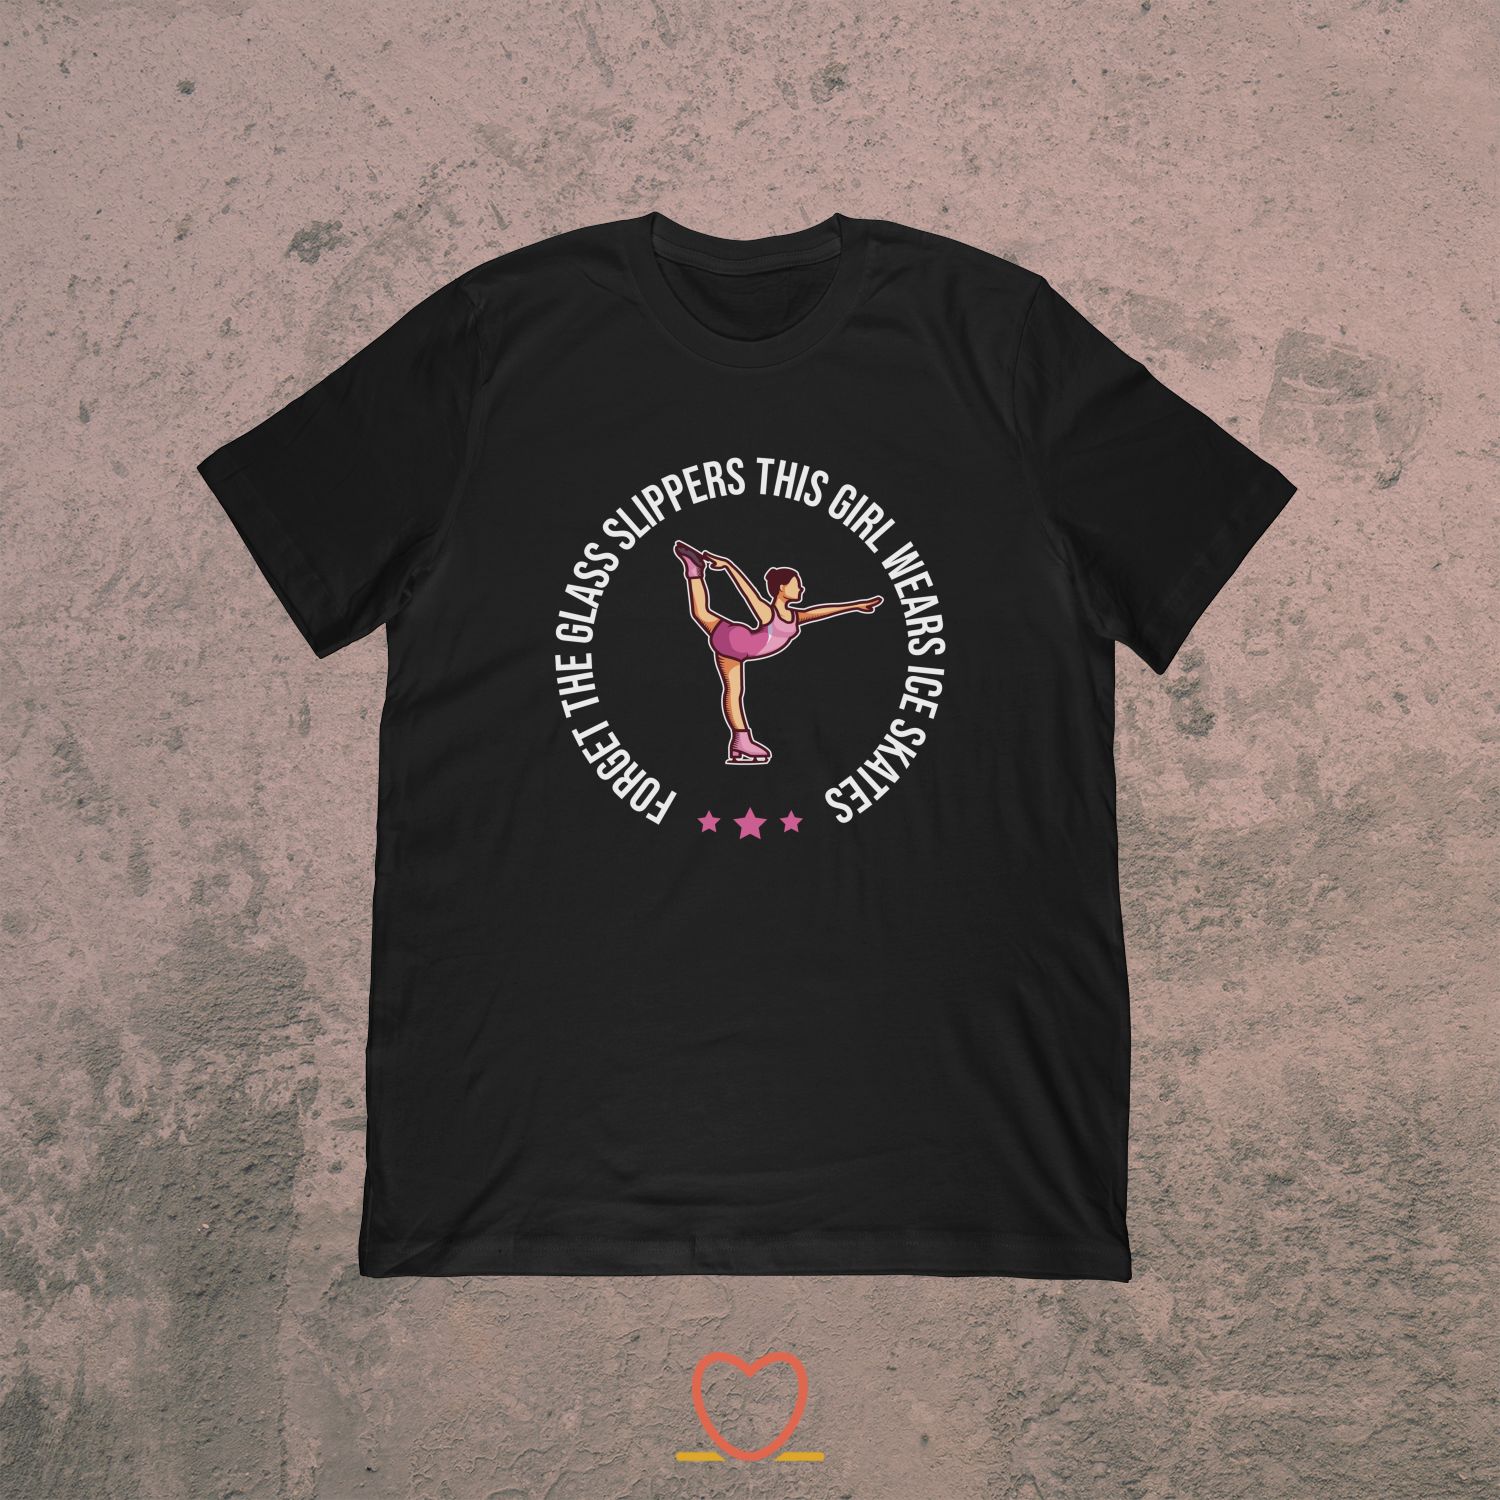 This Girl Wears Ice Skates – Ice And Figure Skating Tee